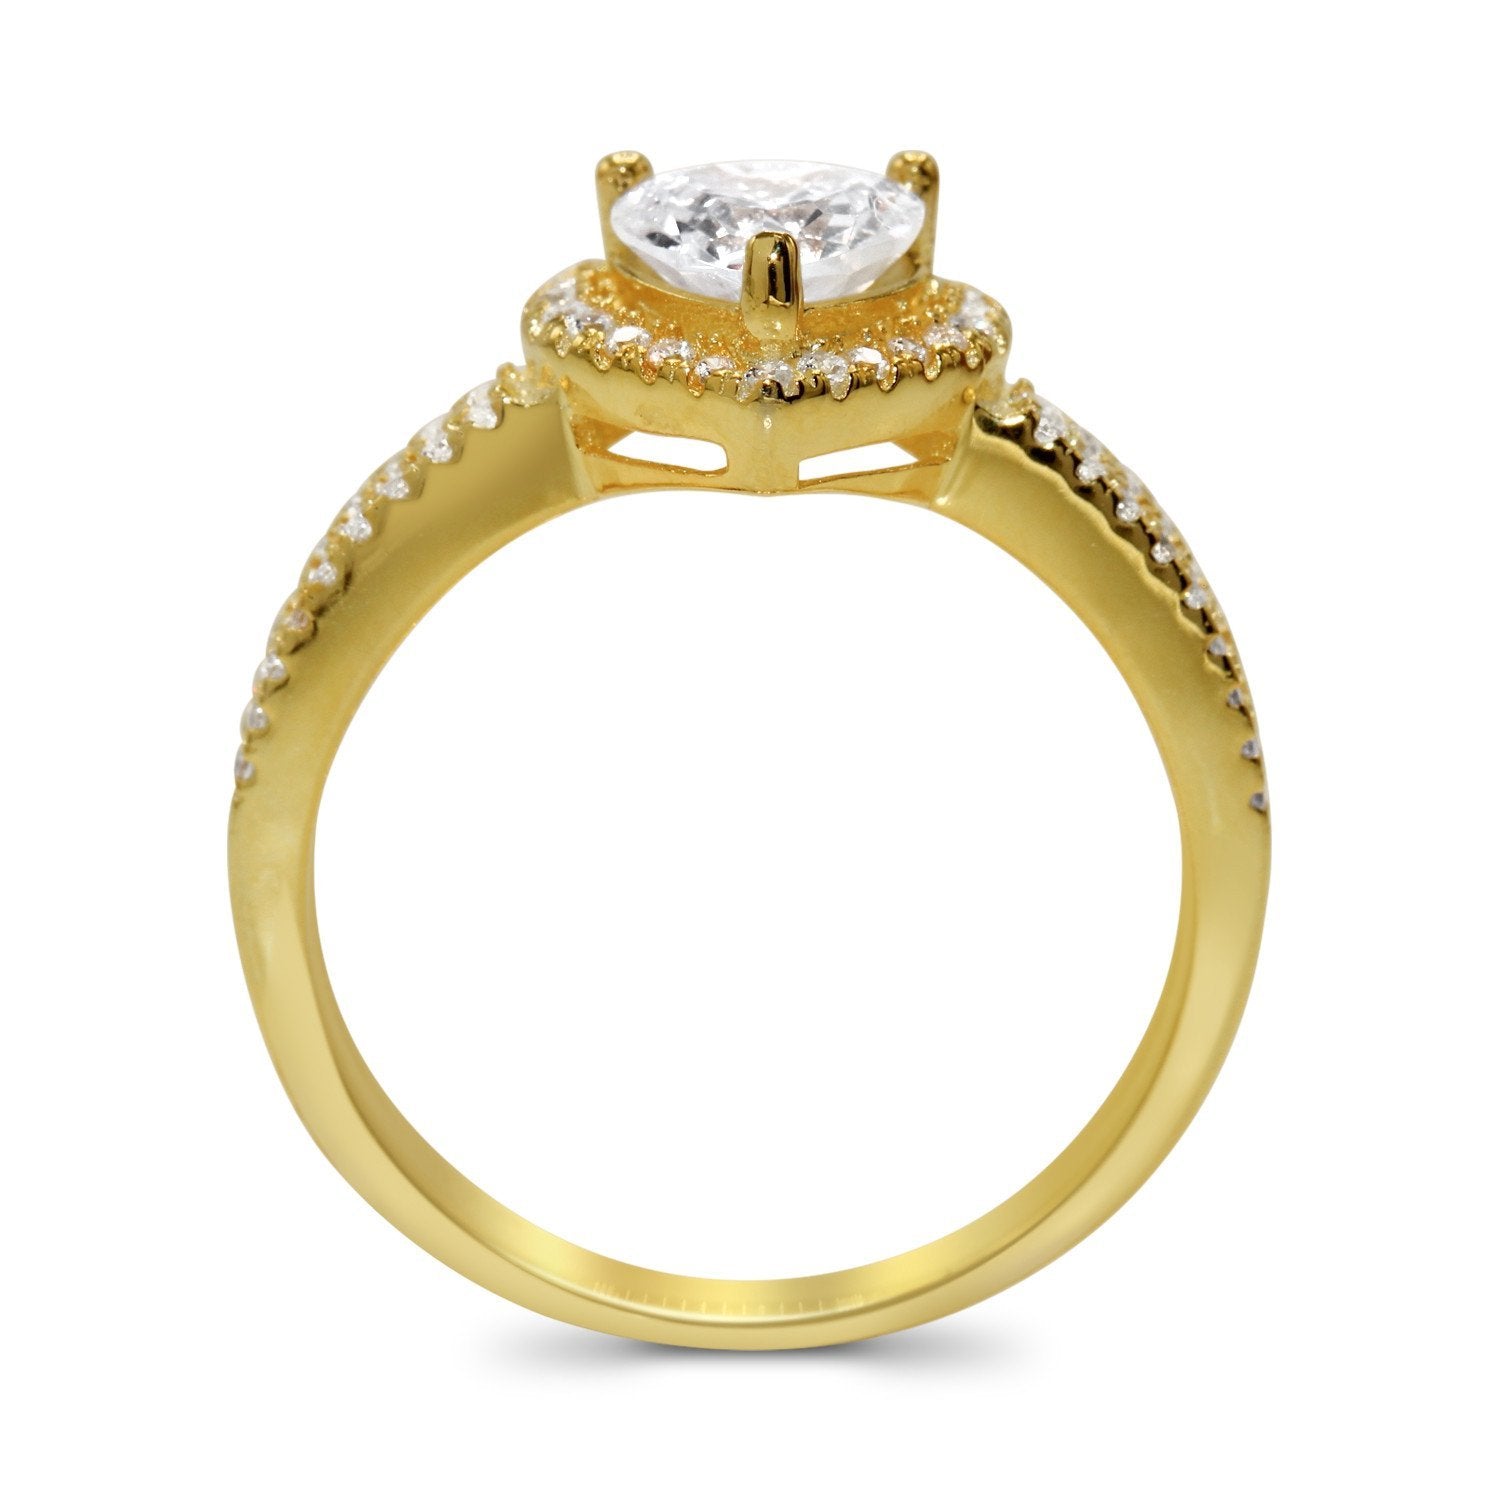 Heart Shaped Cubic Zirconia Ring in Gold Plated Sterling Silver